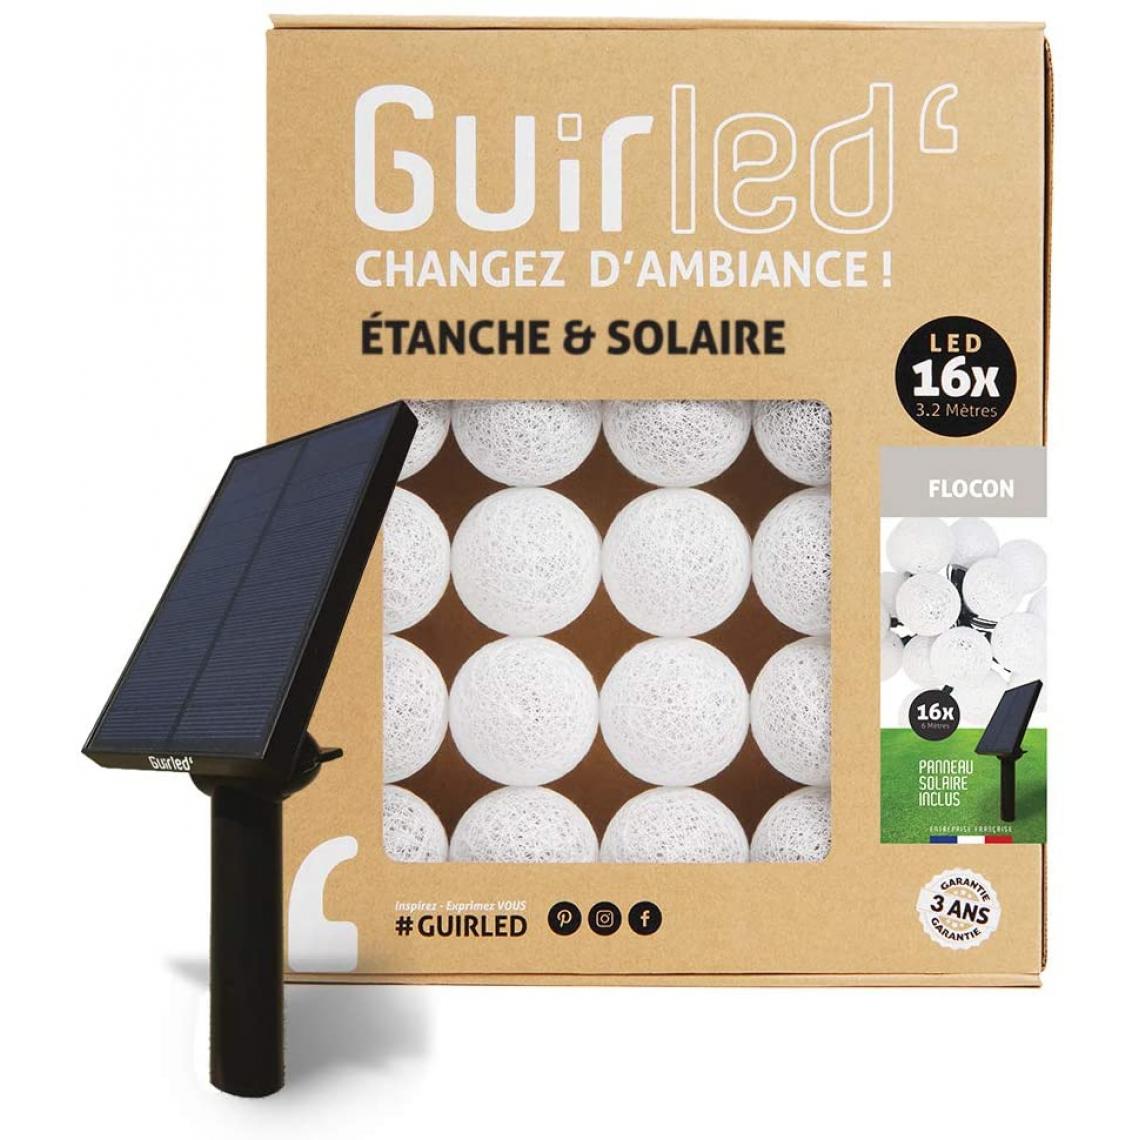 Guirled - Guirlande boule lumineuse 16 LED Outdoor - Flocon - Eclairage solaire